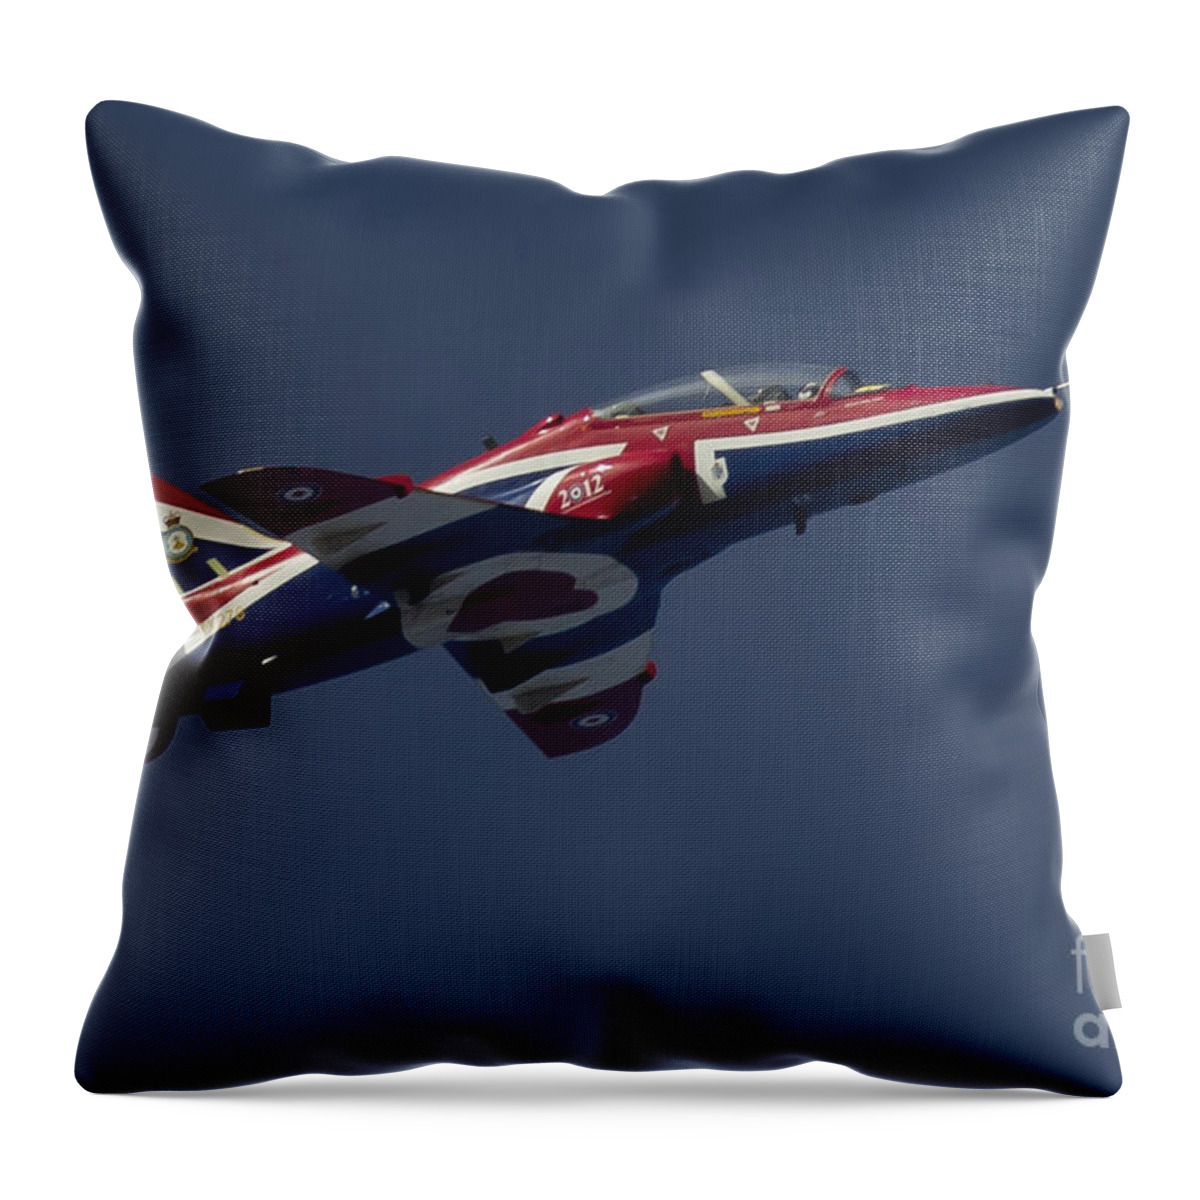 Union Jack Hawk Throw Pillow featuring the photograph Union Jack Hawk by Airpower Art